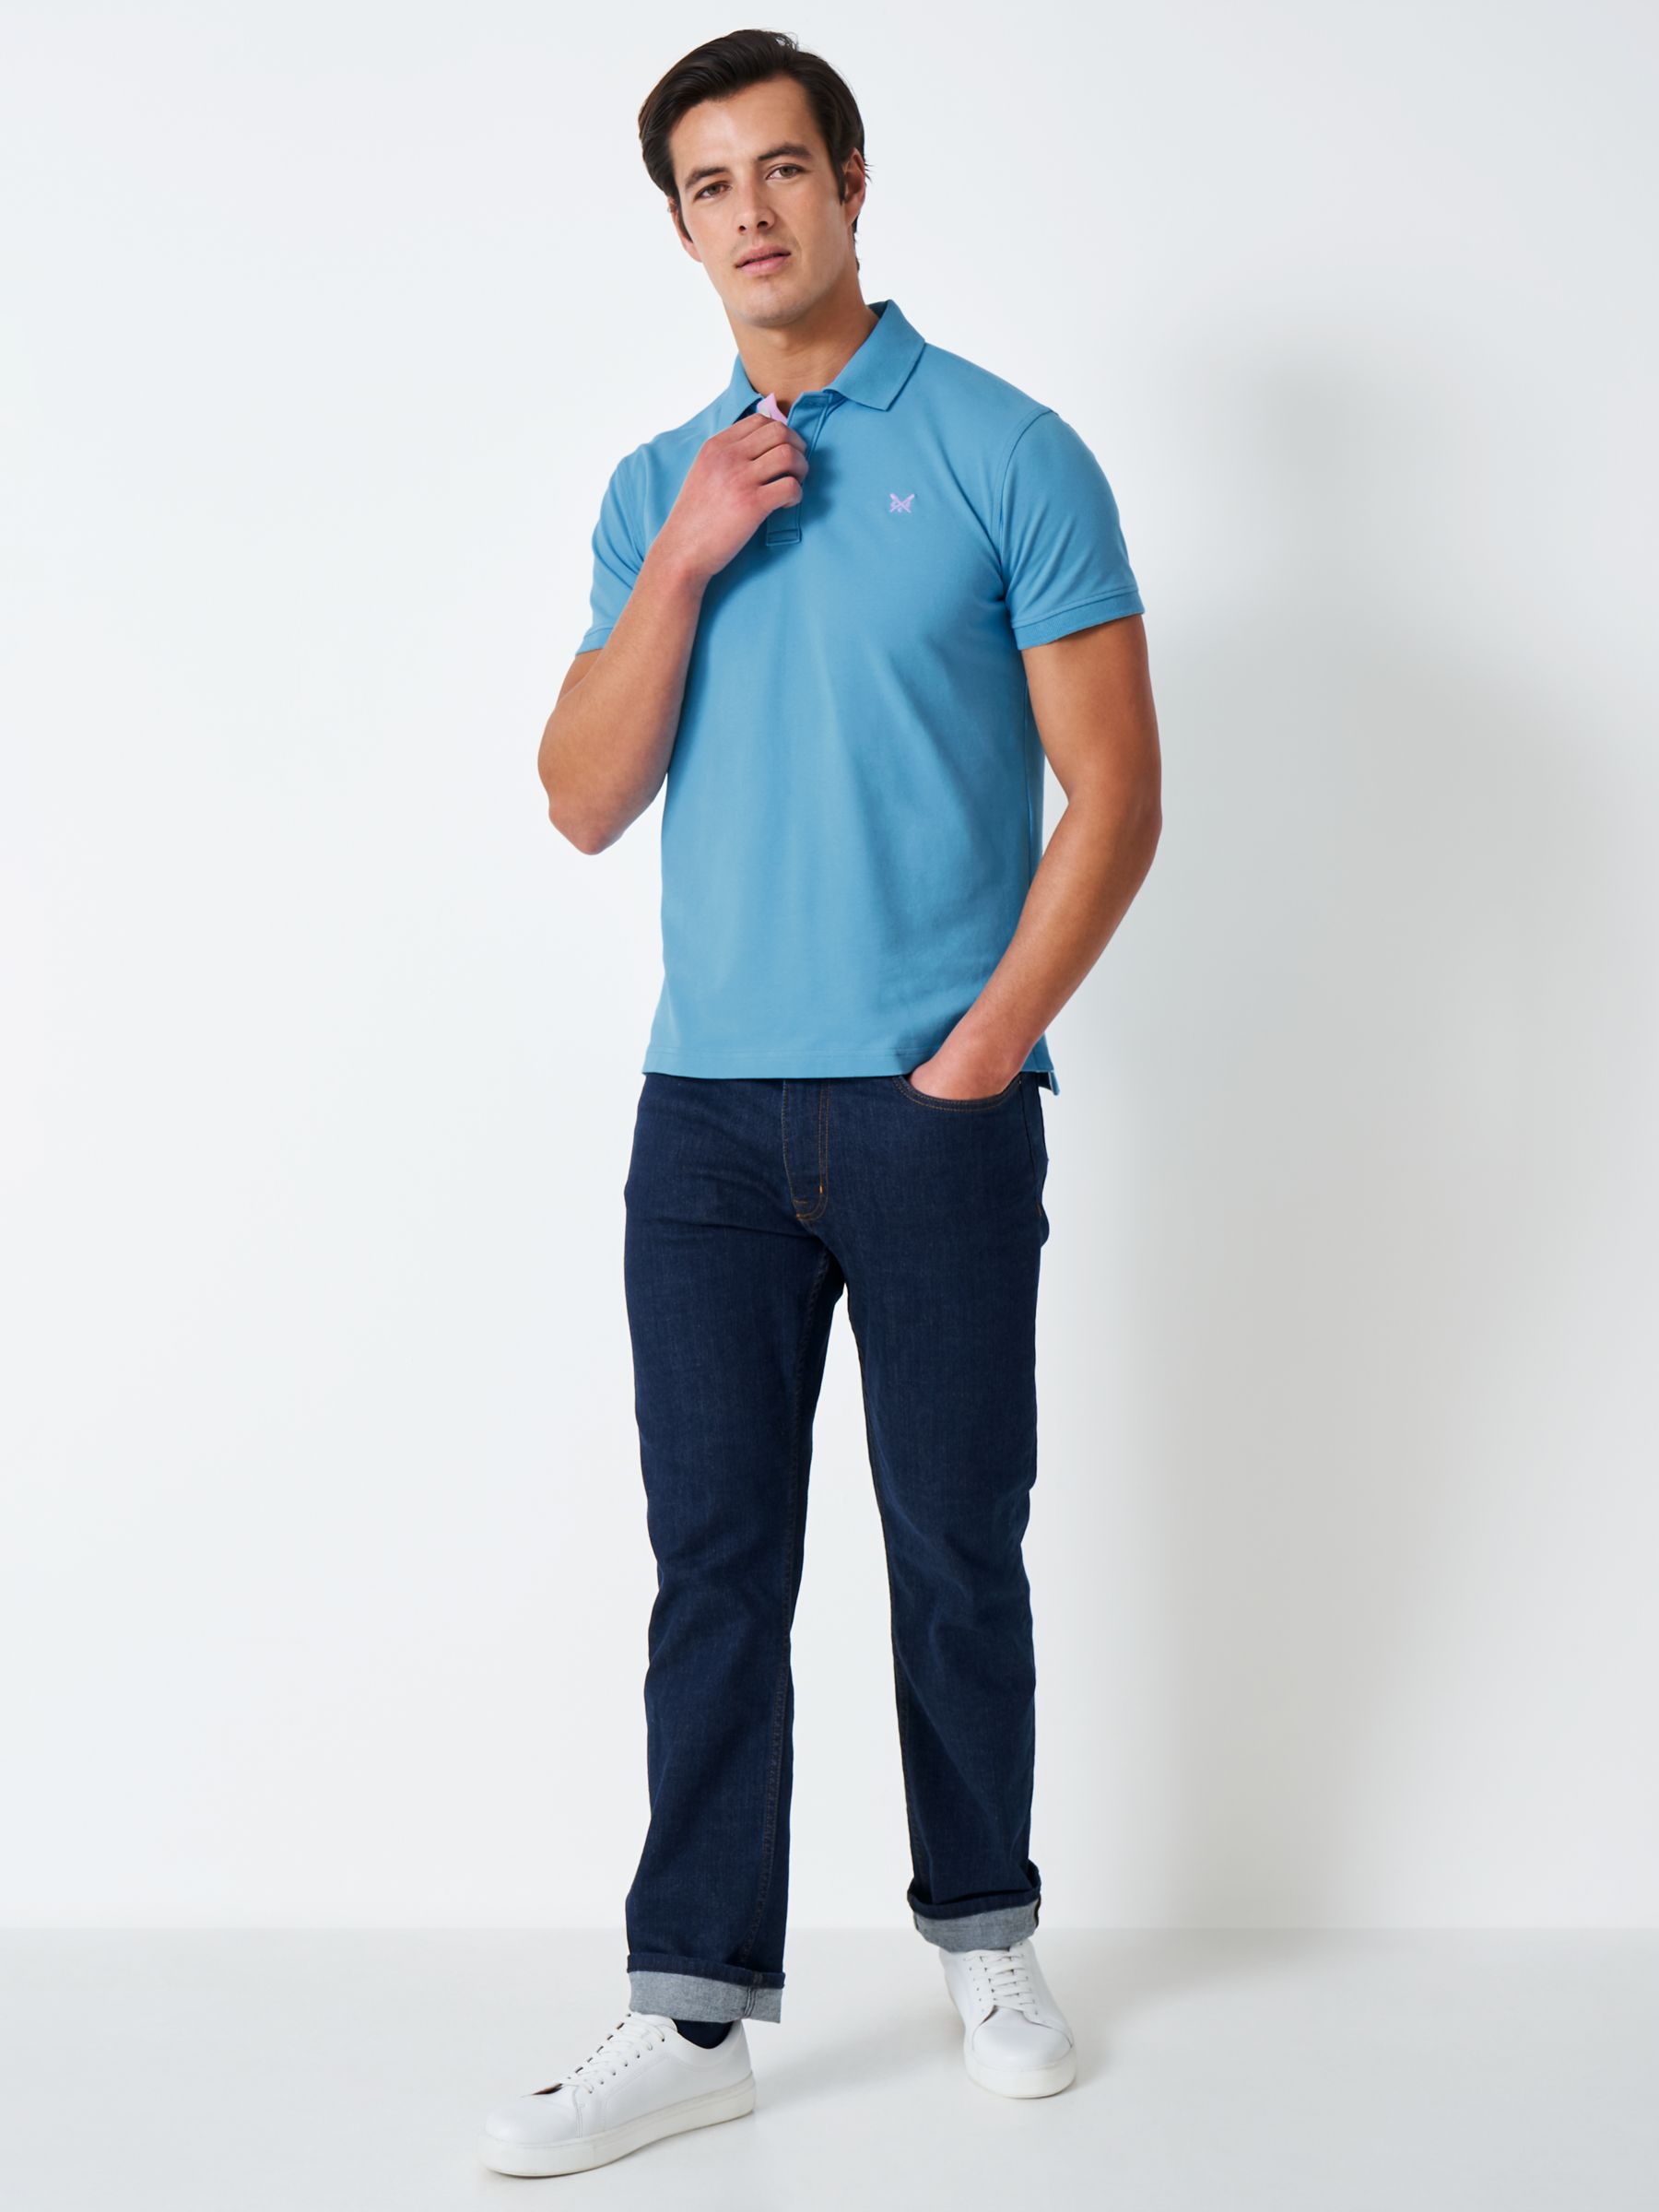 Crew Clothing Piqué Top, Sleeve Blue & Bright Polo Short Lewis John Partners at